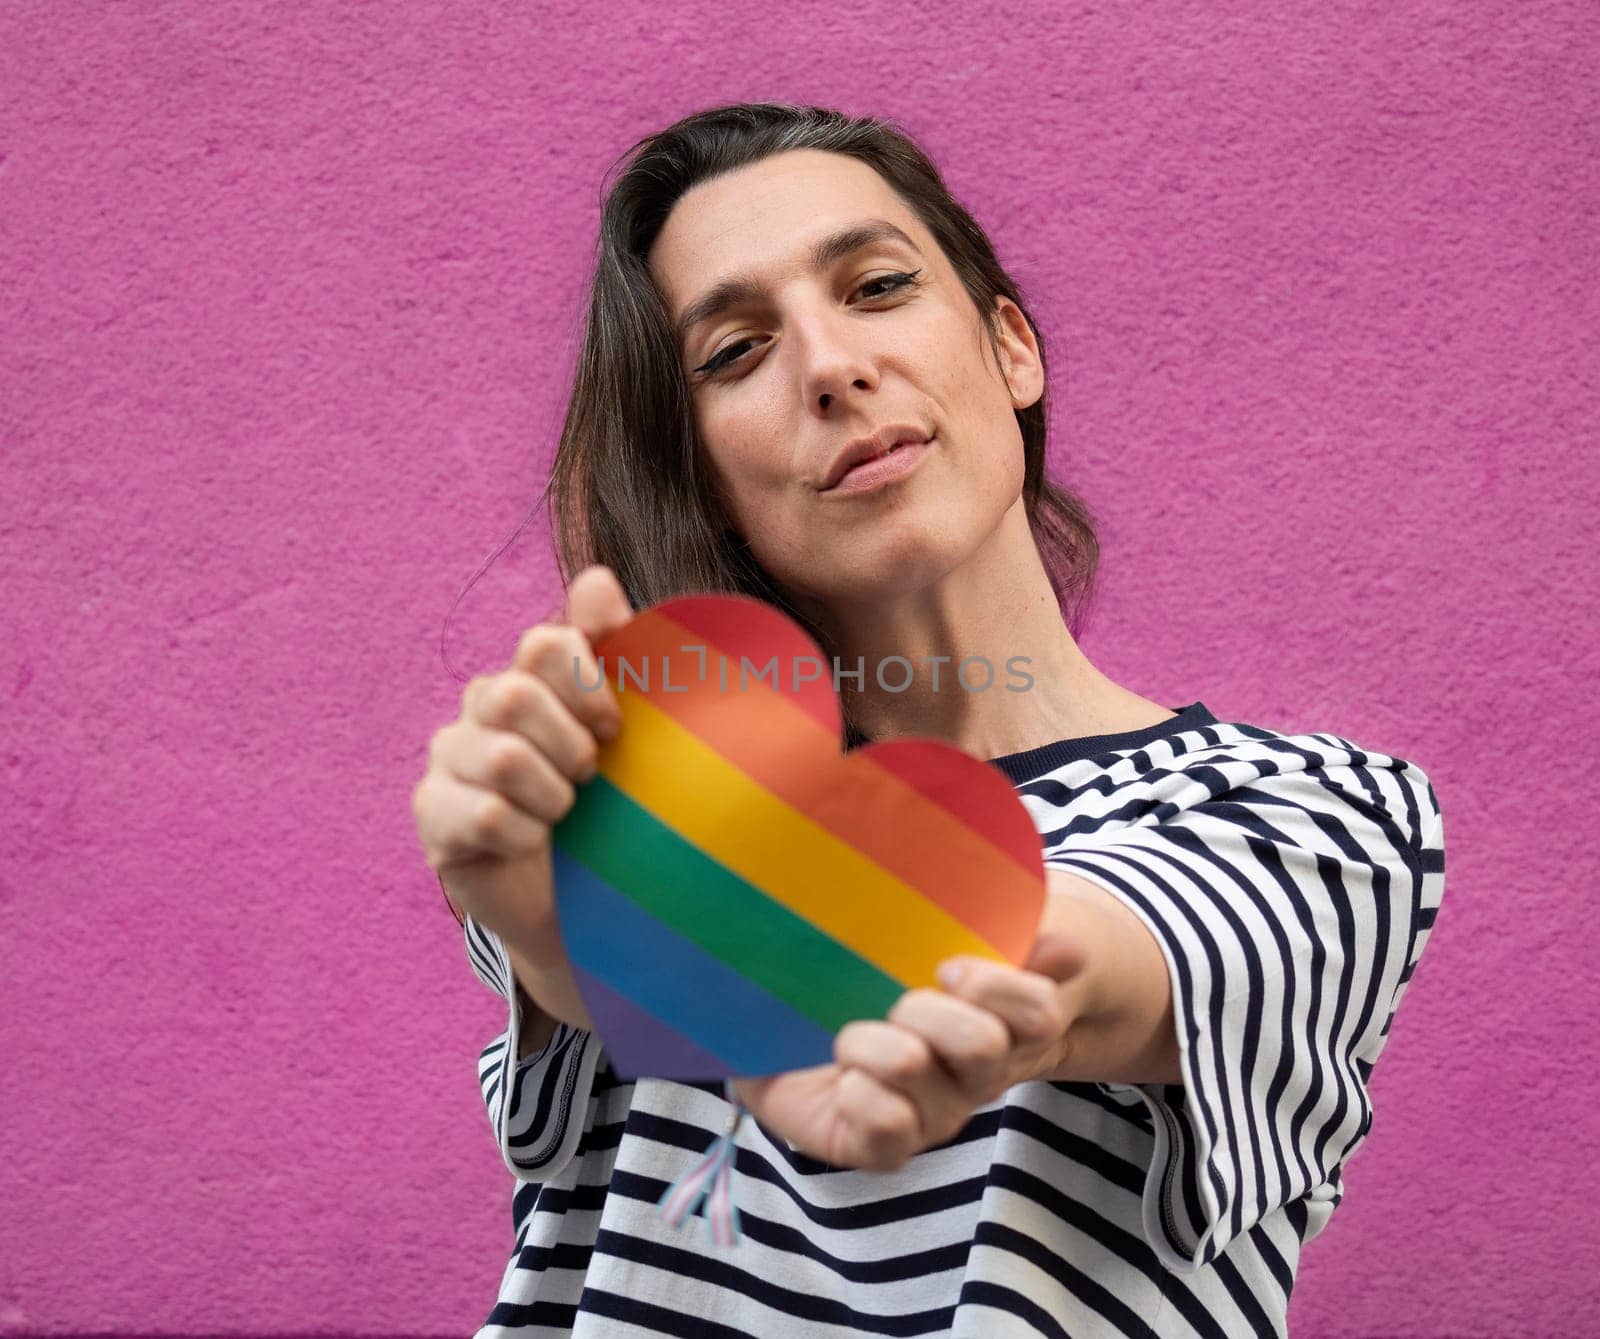 Close up front view of lesbian woman with a rainbow heart to support LGBT community isolated on pink background.